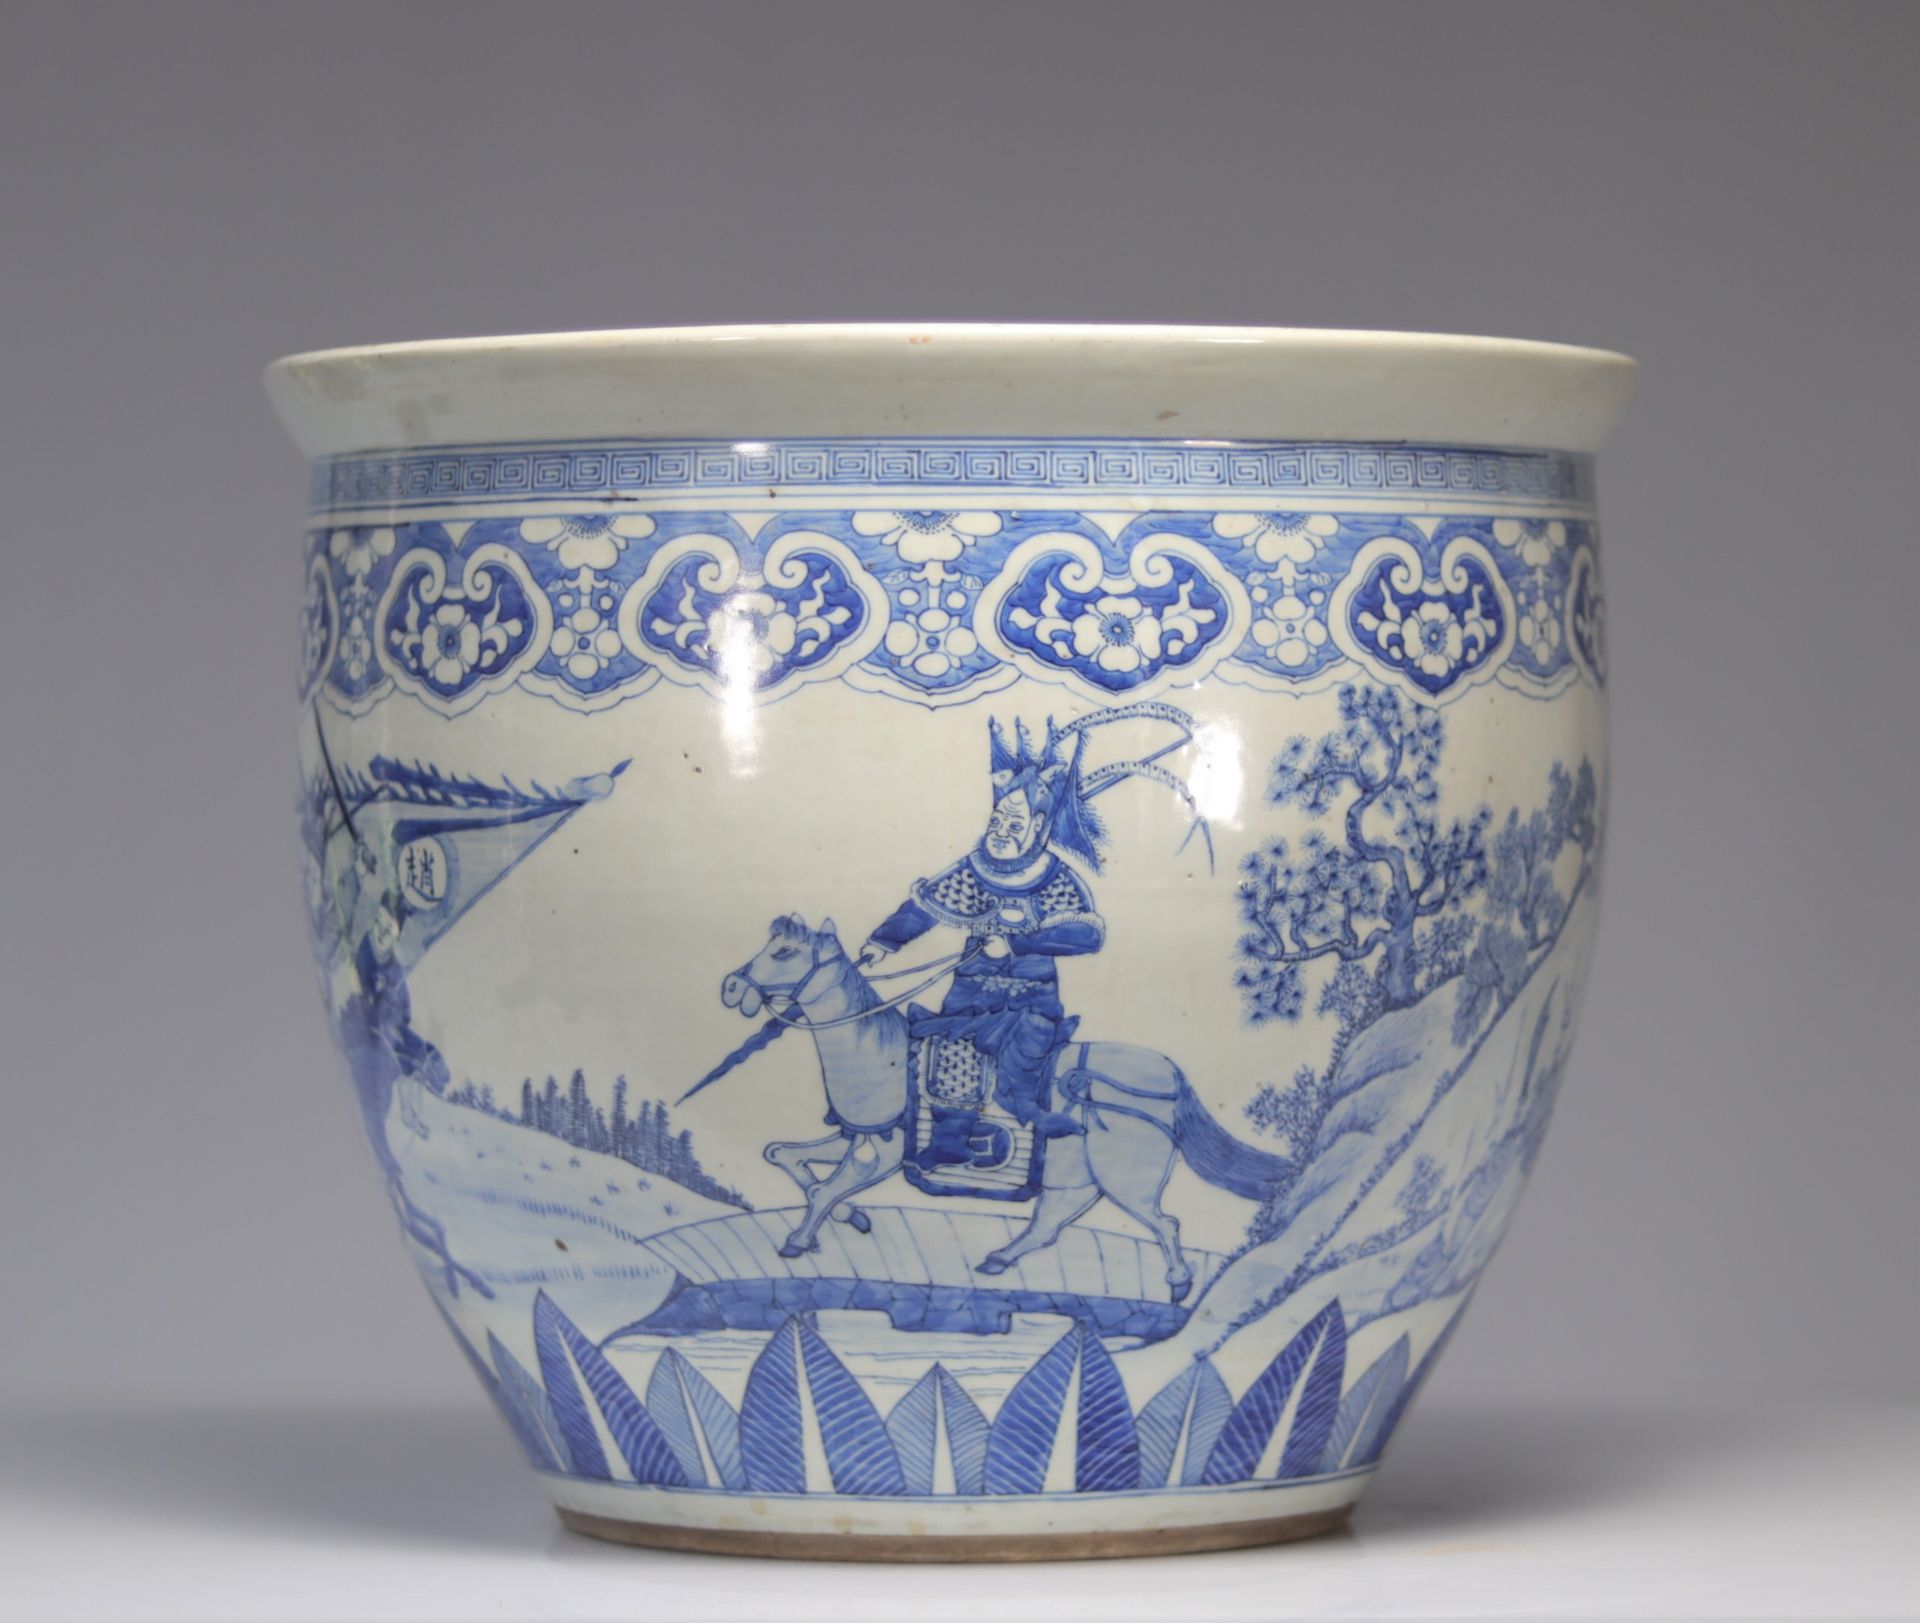 Imposing blue-white porcelain vase decorated with Qing period warriors